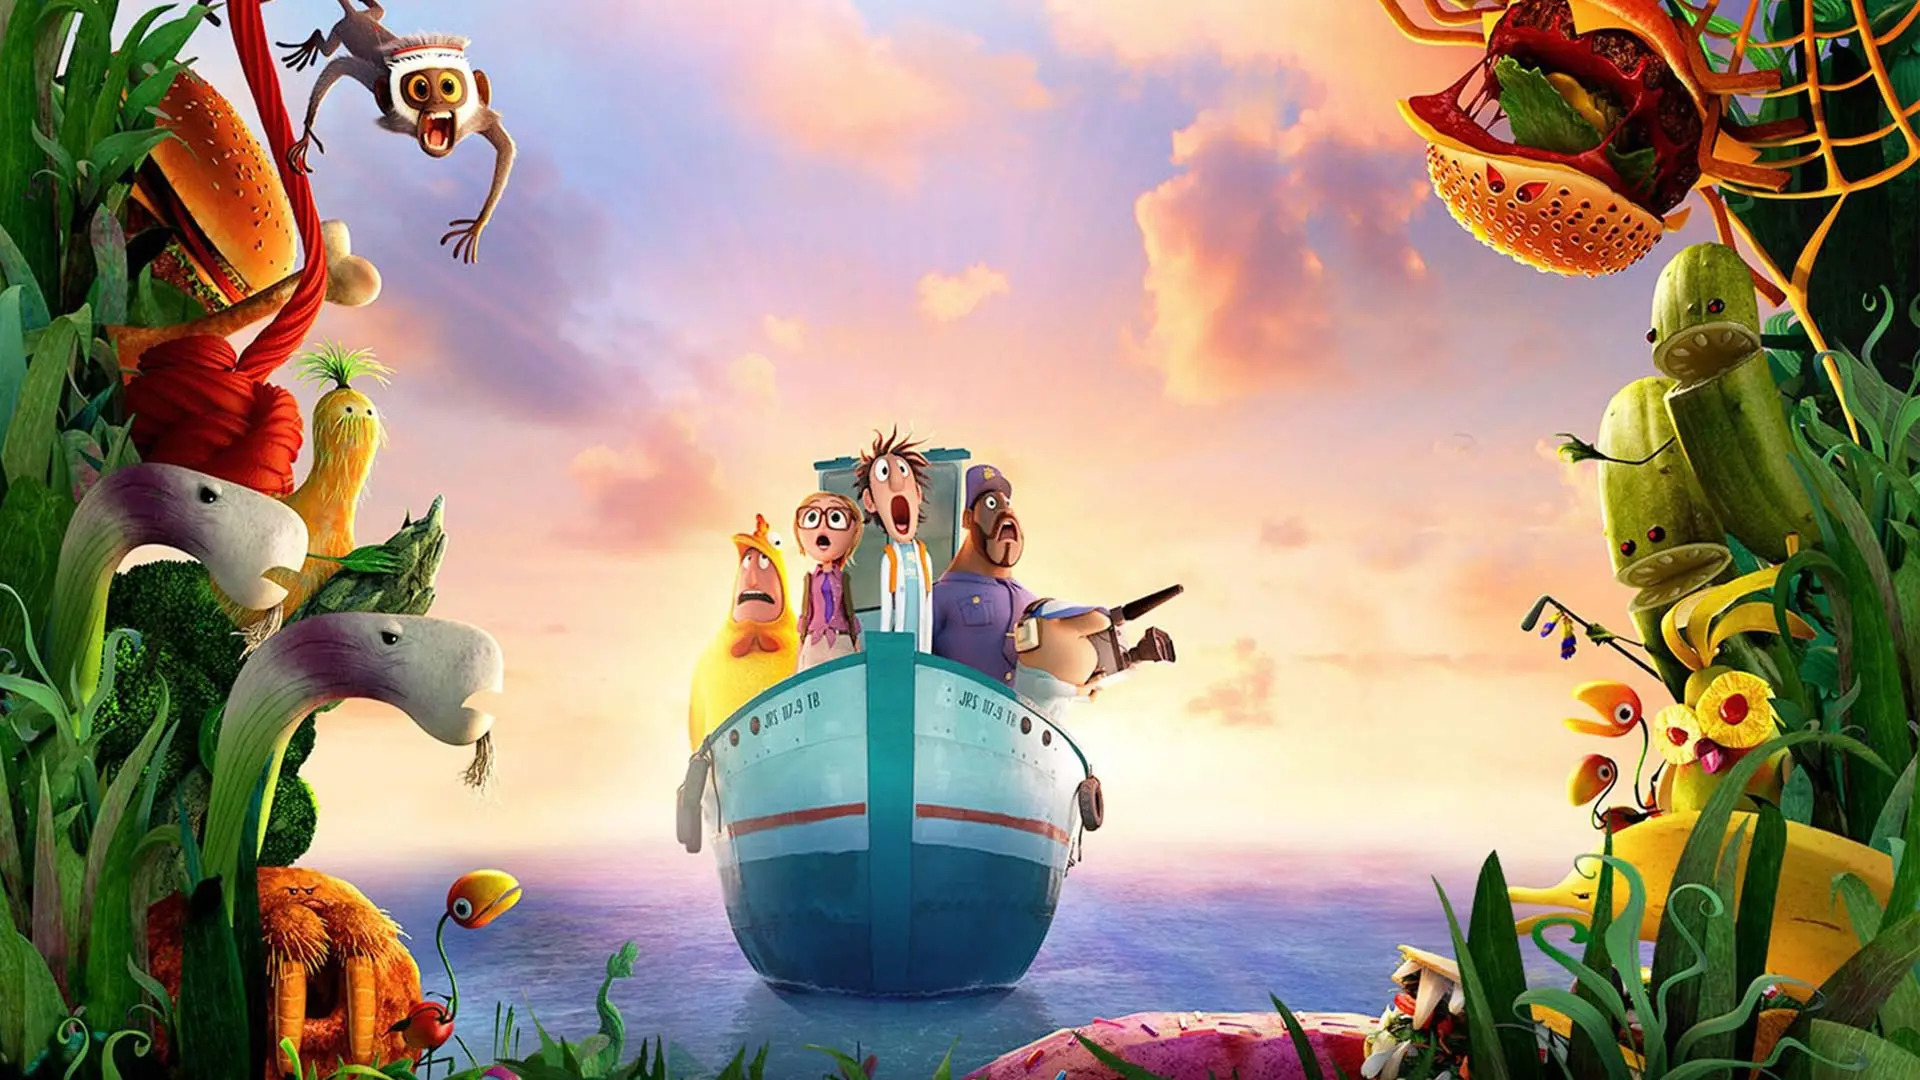 cloudy-with-chance-meatballs-some-characters-on-a-ship_17_11zon